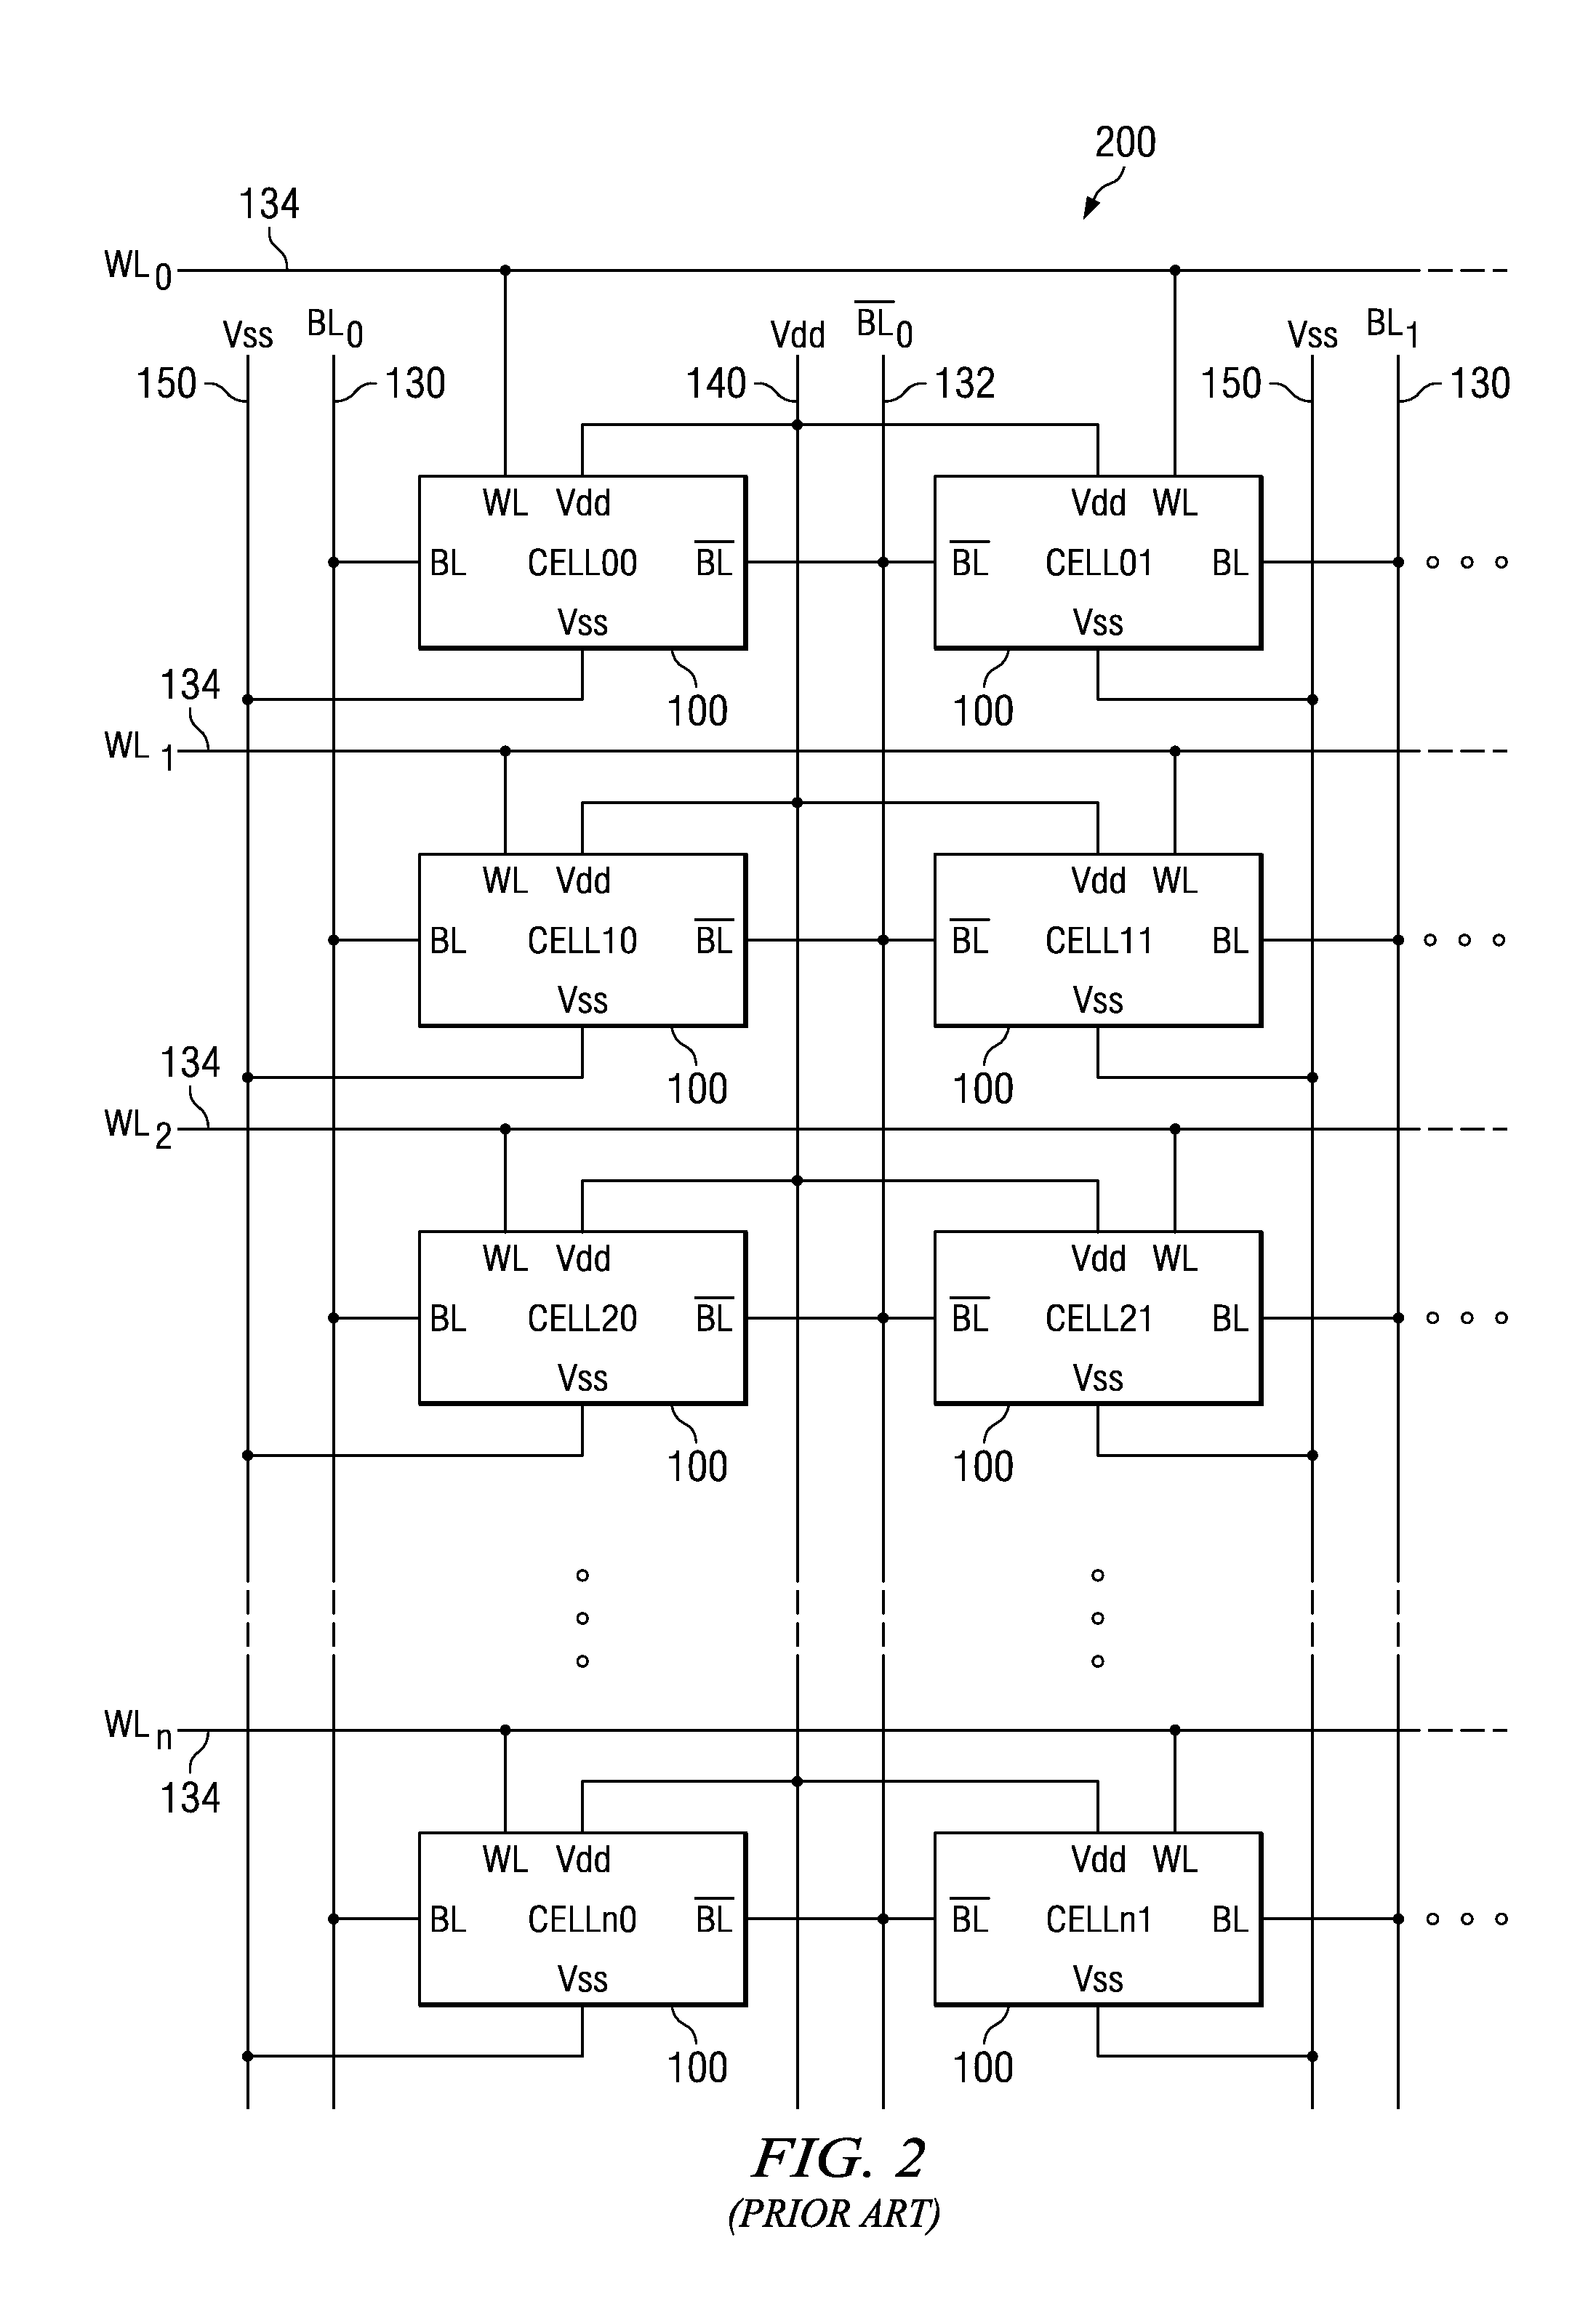 Area efficient implementation of small blocks in an SRAM array